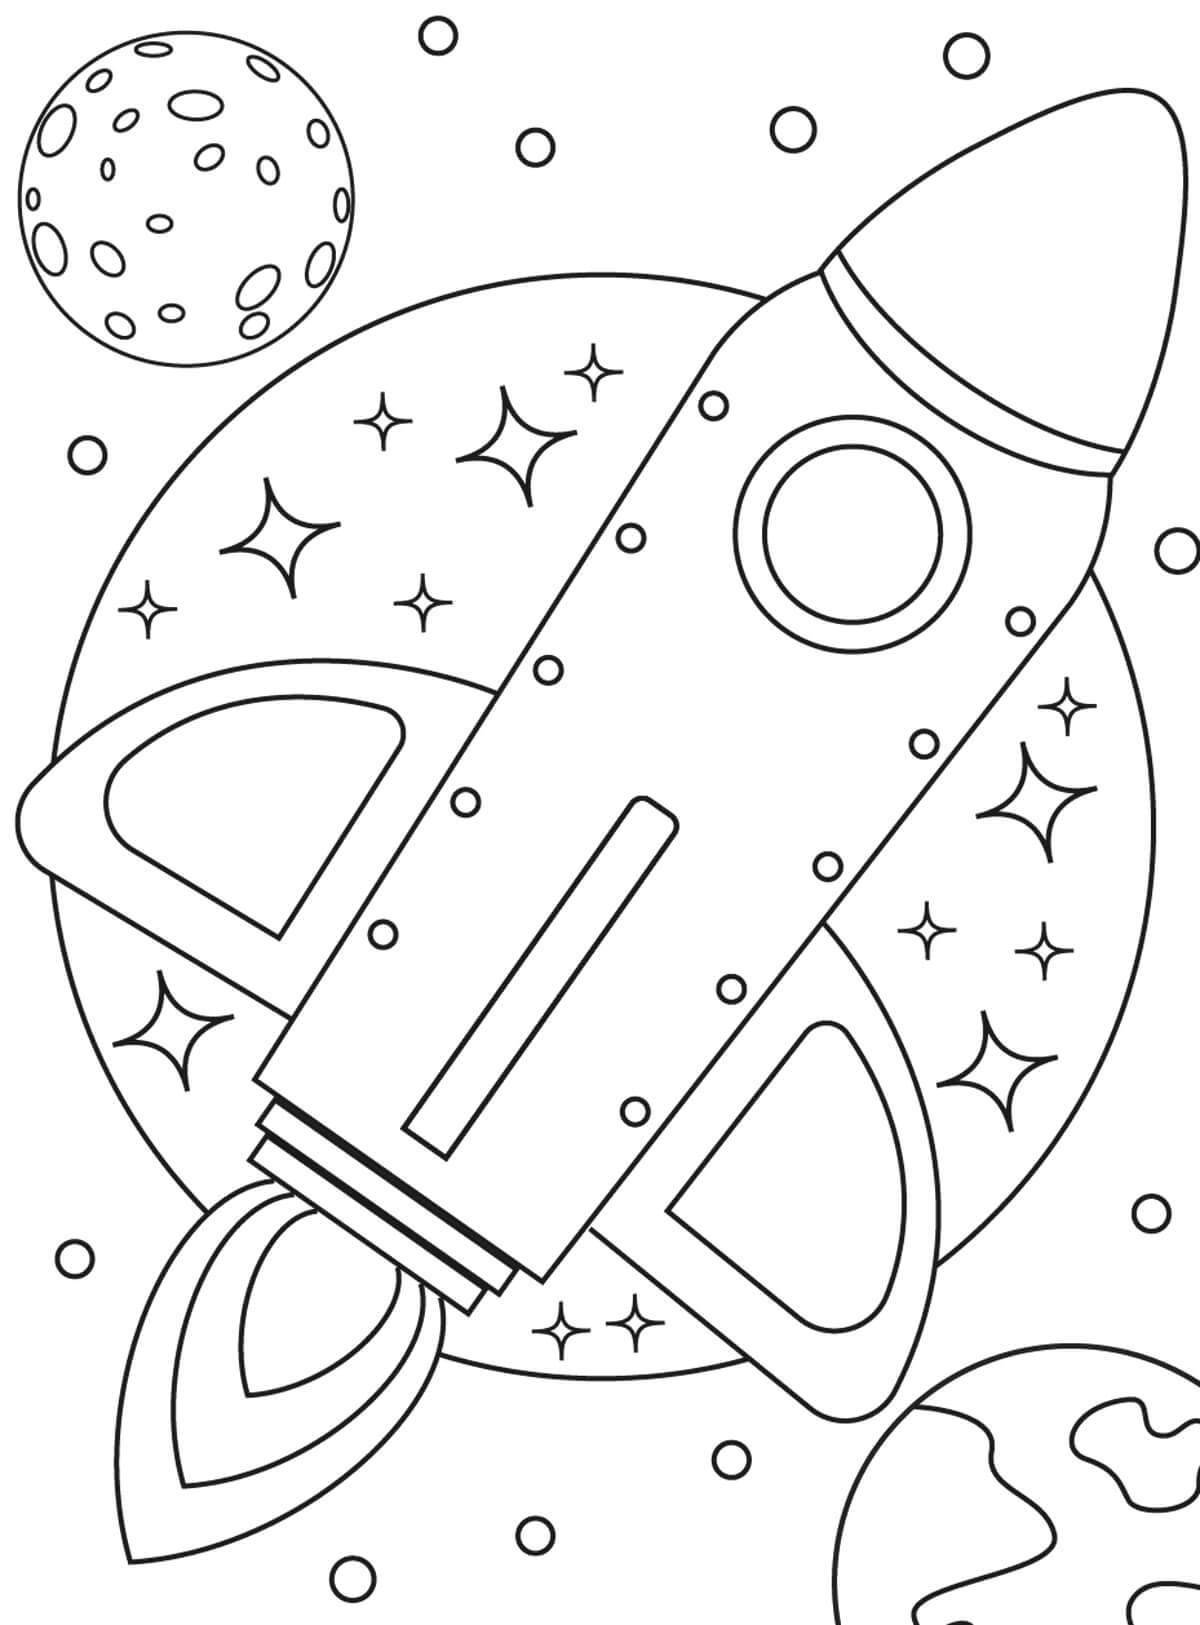 Fun space coloring book for 3-4 year olds